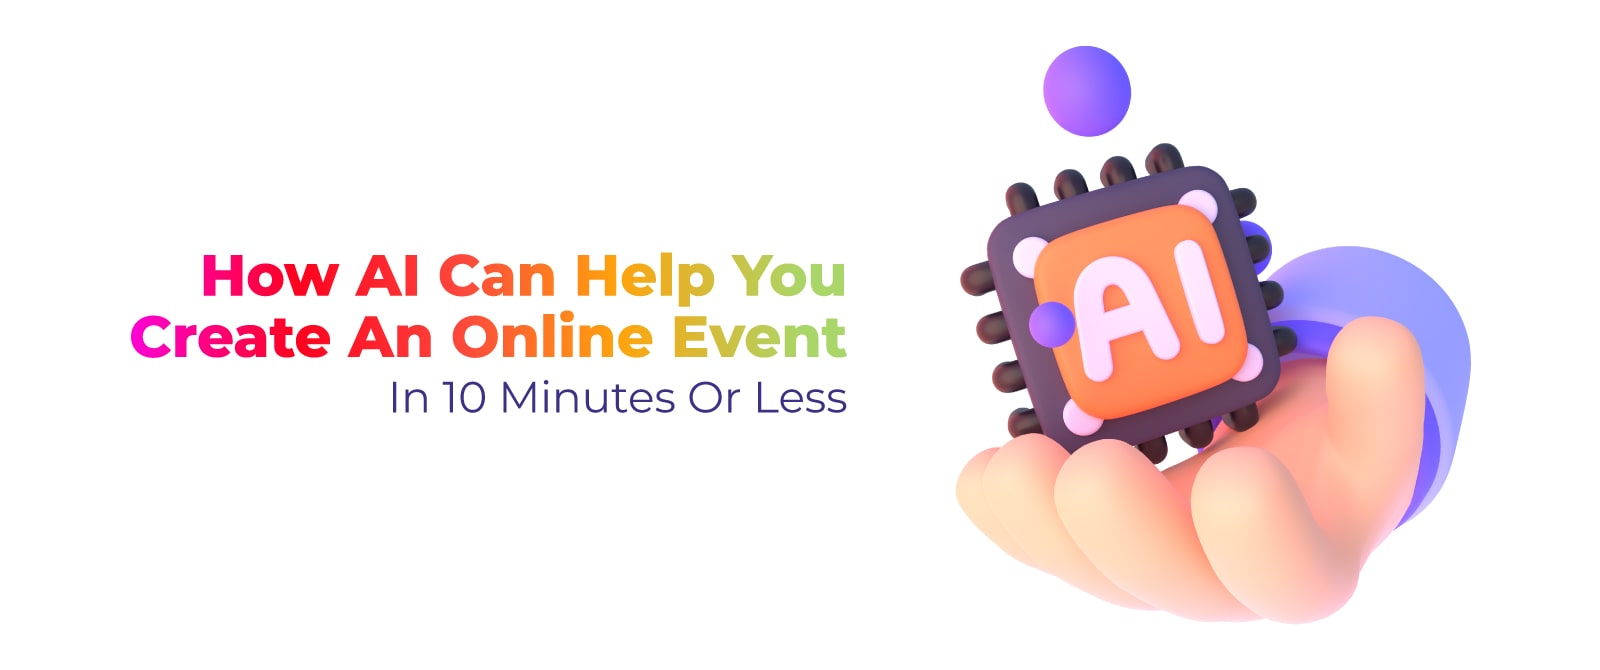 How AI Can Help You Create an Online AI Event in 10 Minutes or Less